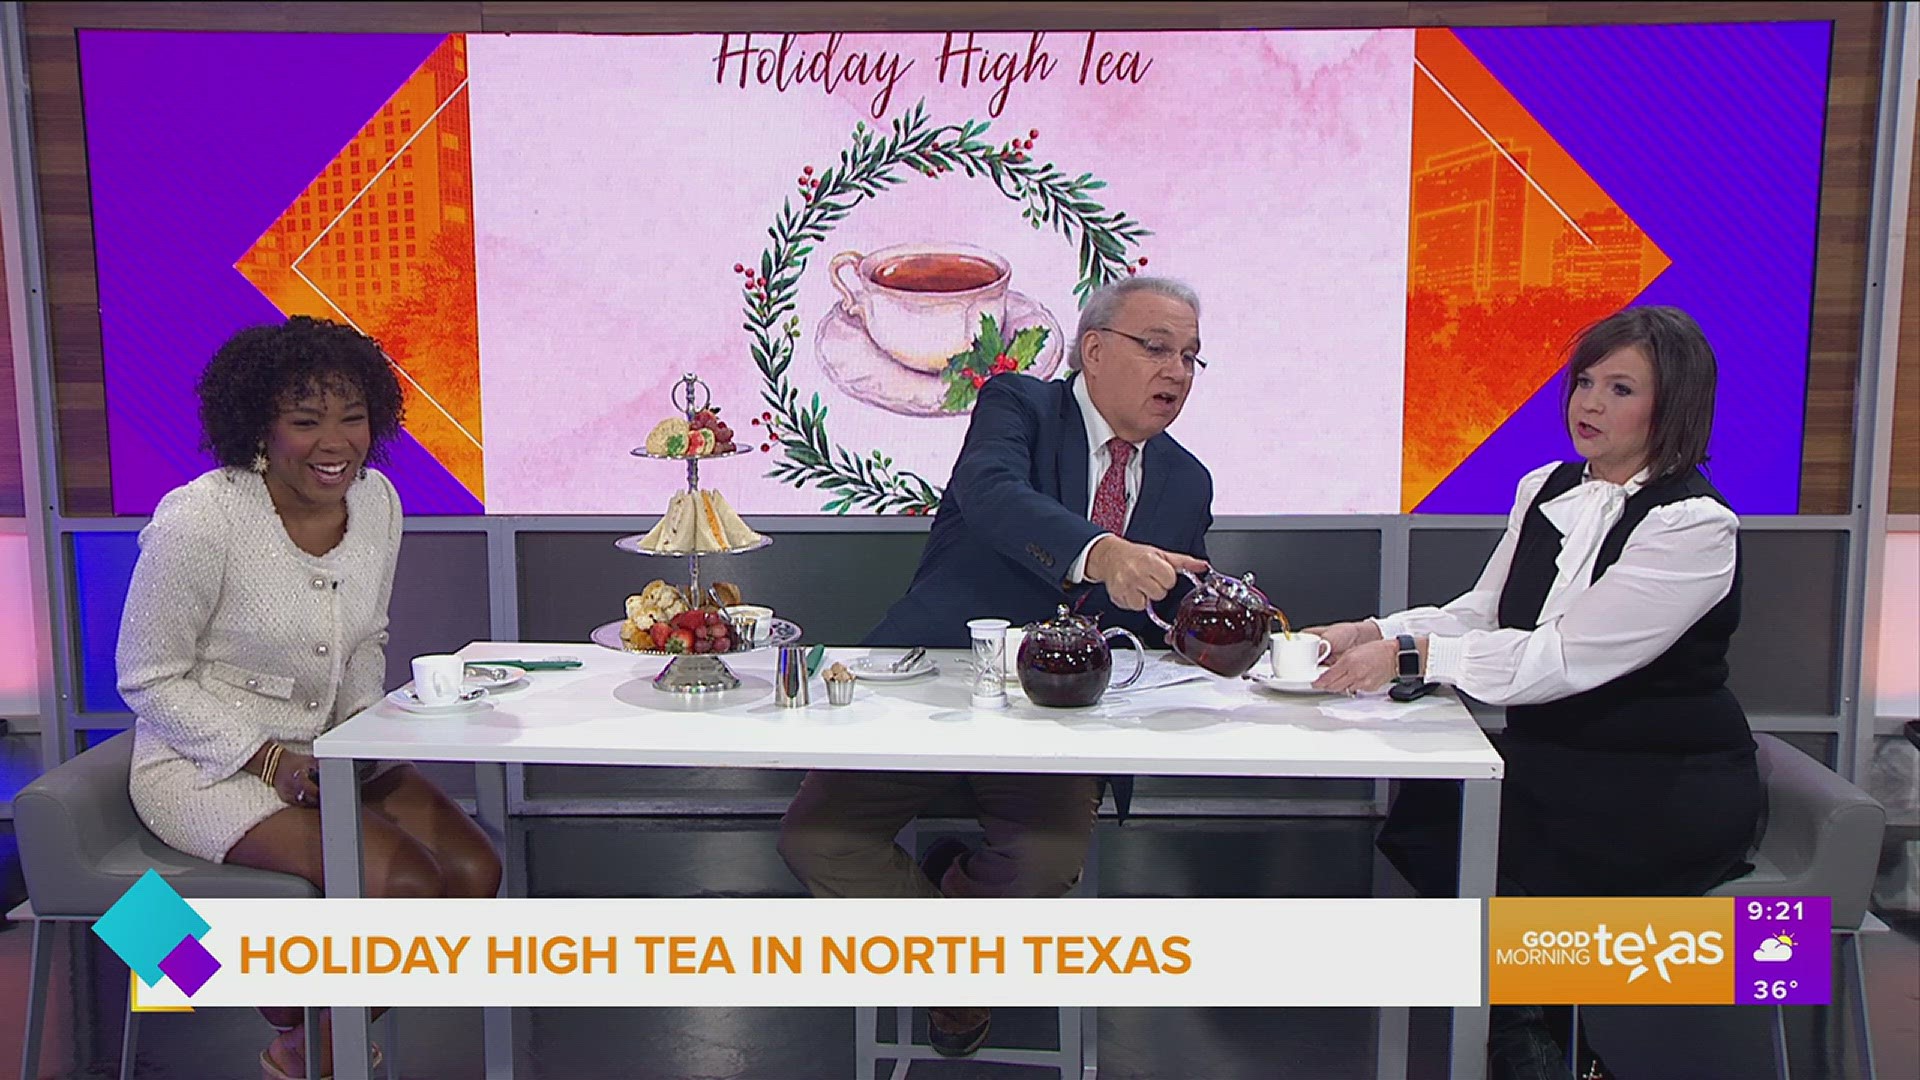 Raise a pinky for a high tea holiday! Paige sits down with the founder of "Eats Beats" to tell you his tops picks for afternoon tea in North Texas.